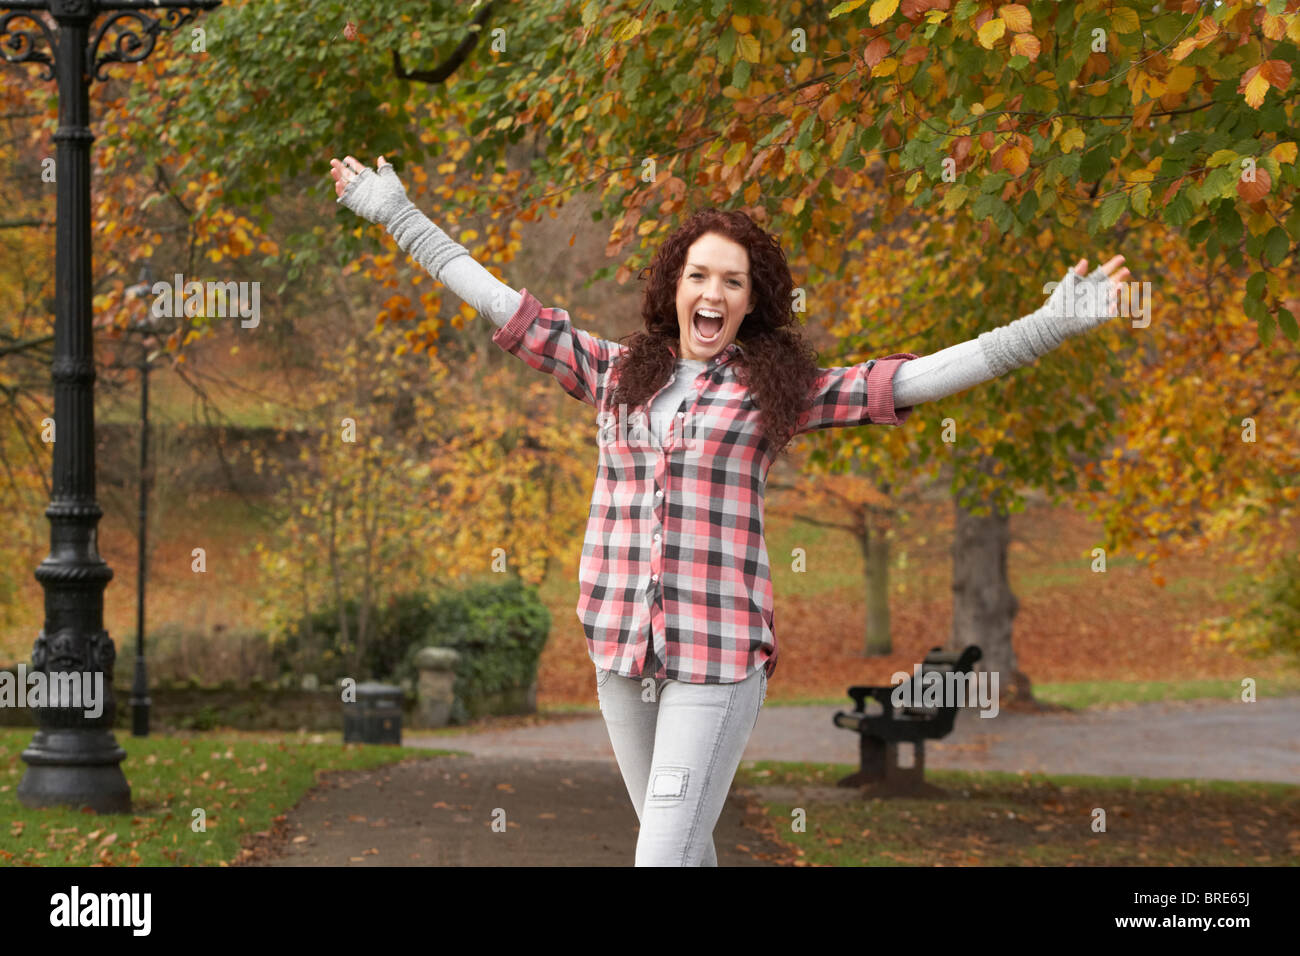 Teenage Girl standing in autumn Park With Arms Outstretched Banque D'Images